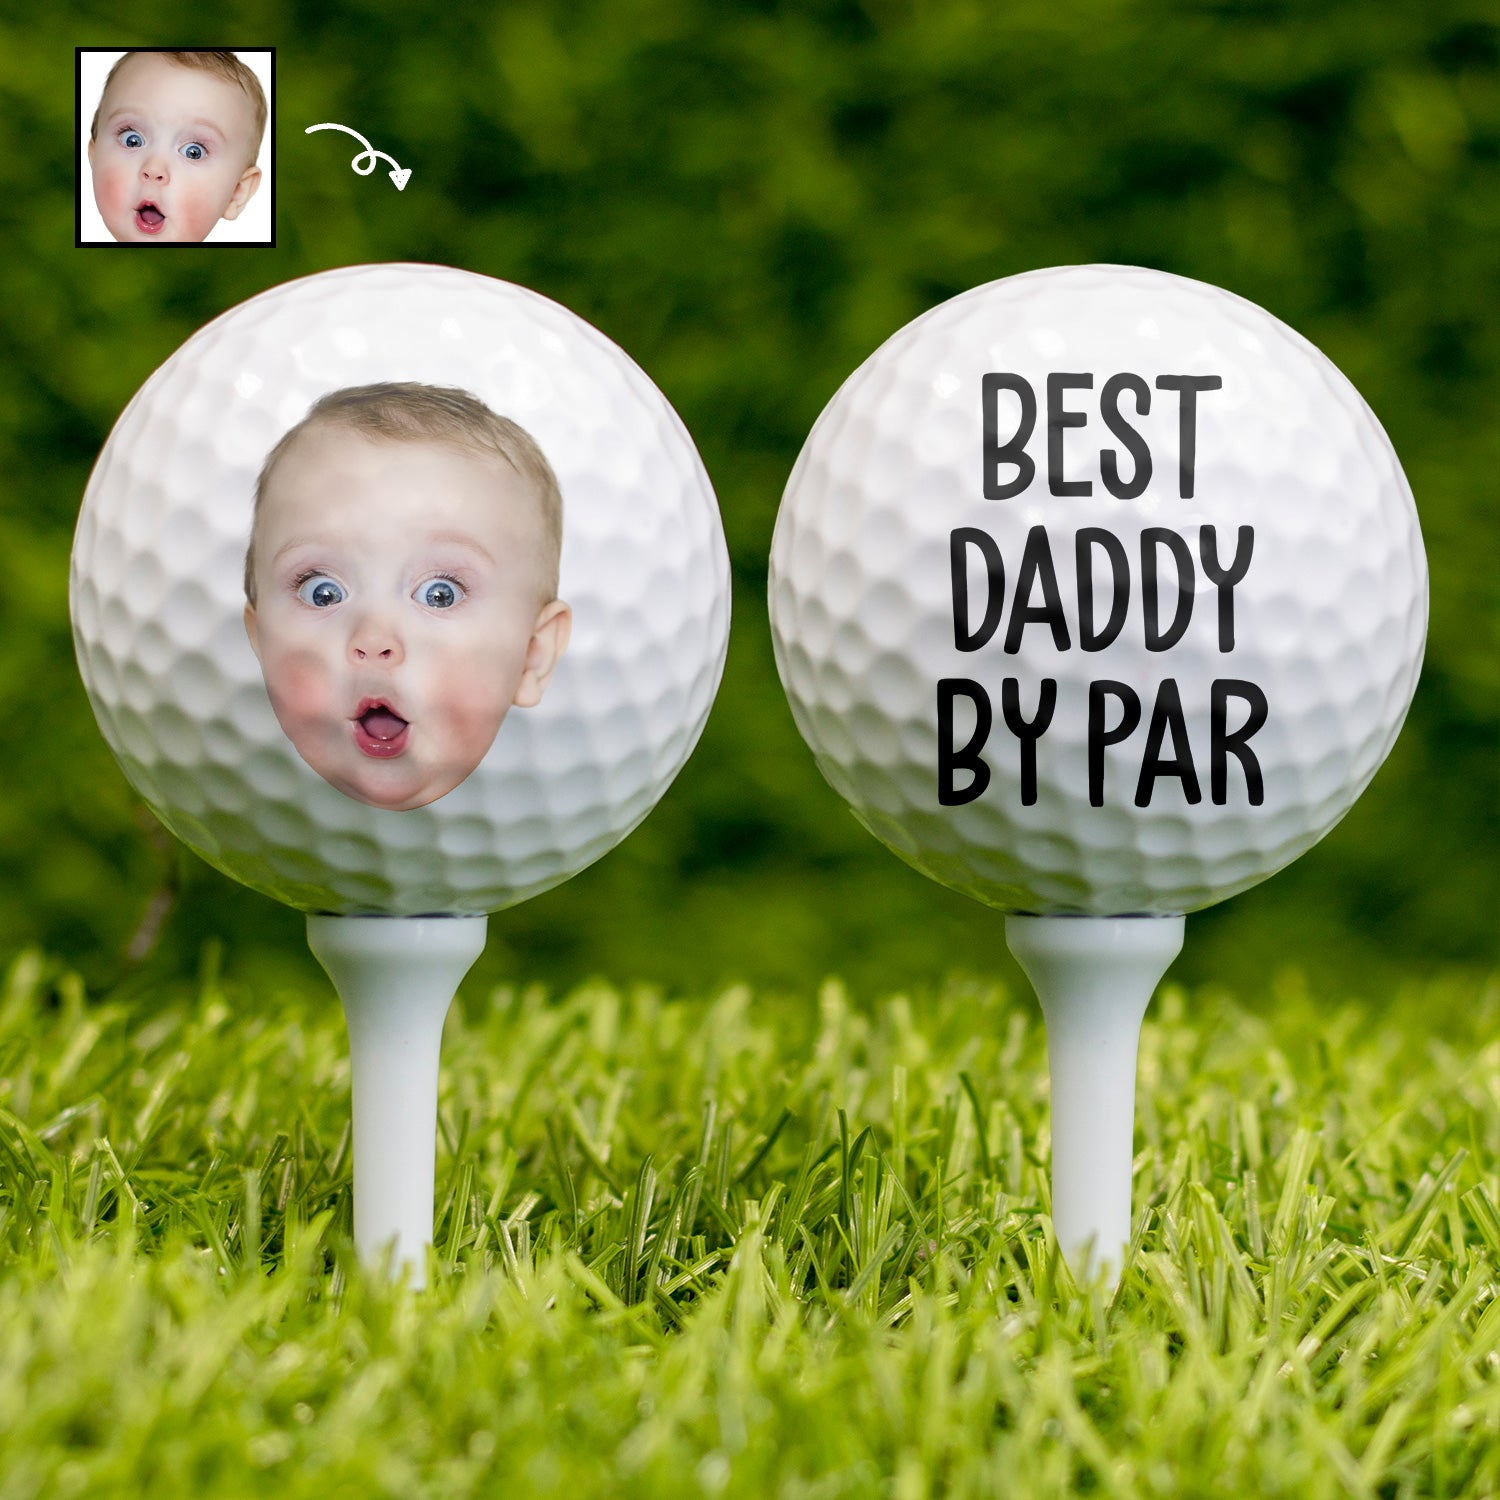 Custom Photo Best Daddy By Par - Gift For Dad, Father, Grandpa, Golfer, Golf Lover - Personalized Golf Ball